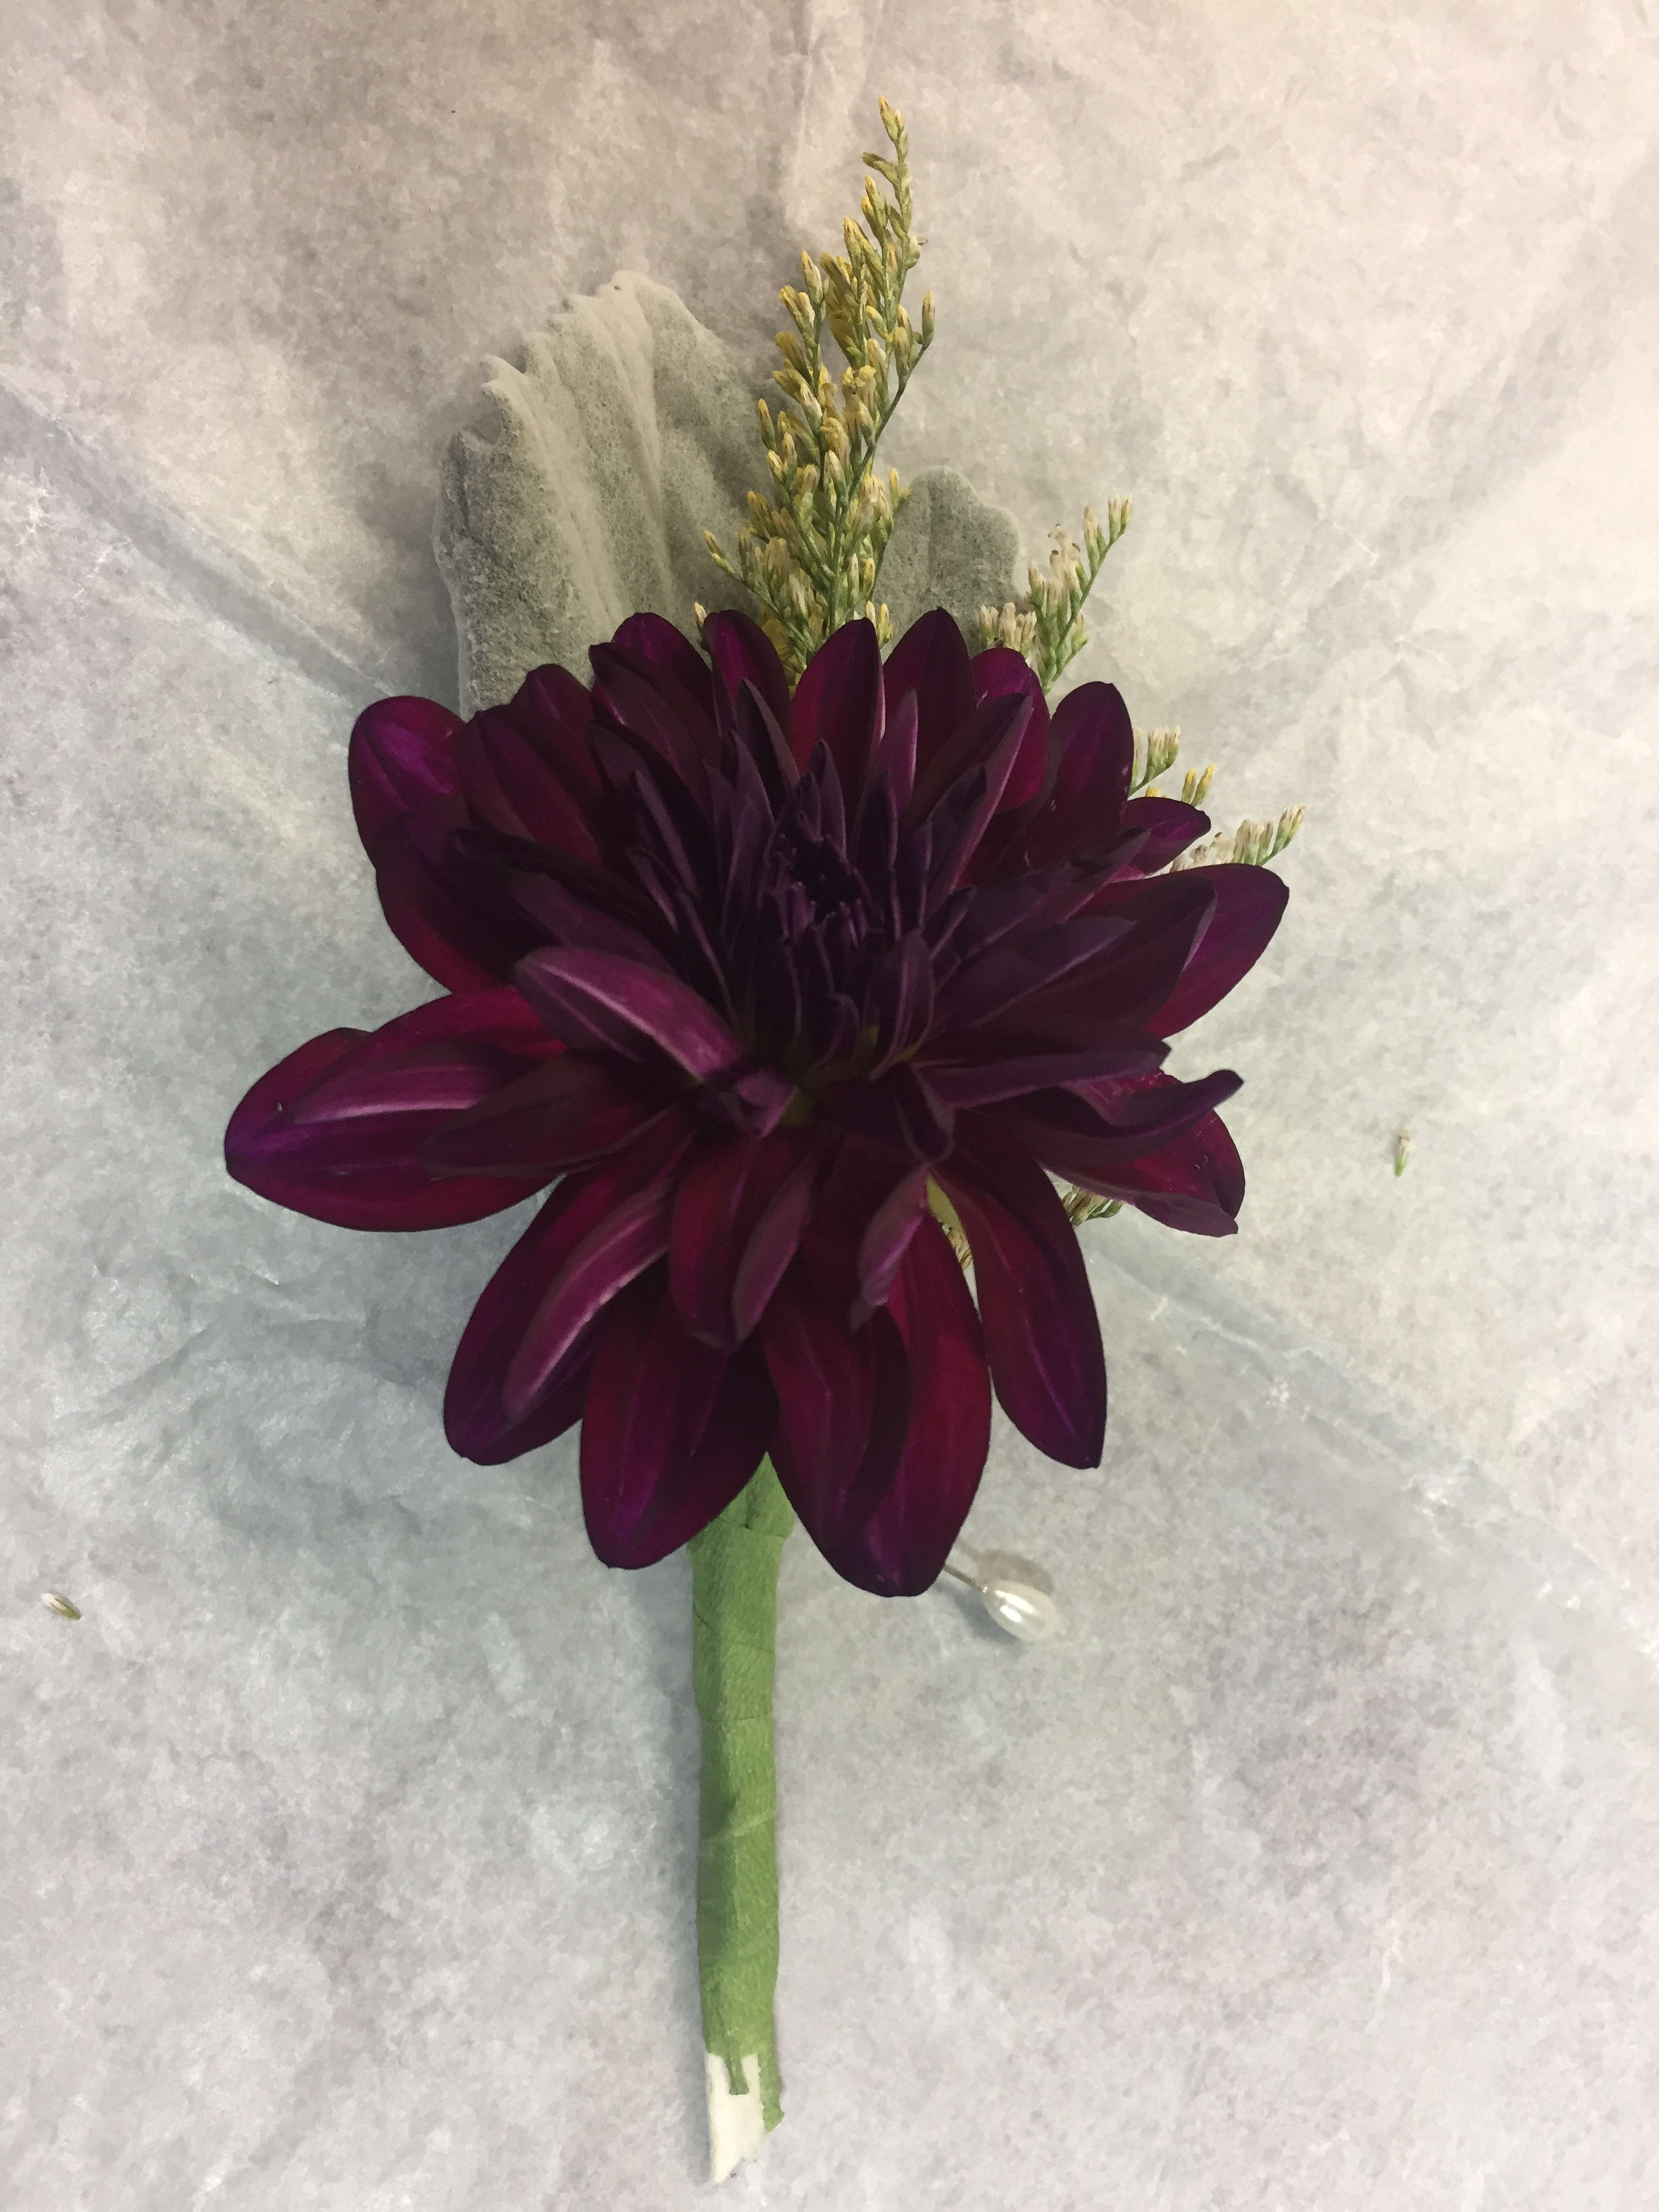 Dahlia Boutonniere - A single Dahlia boutonniere accented with dusty miller and misty blue filler.  Check for availability. This flower is seasonal and price may vary.